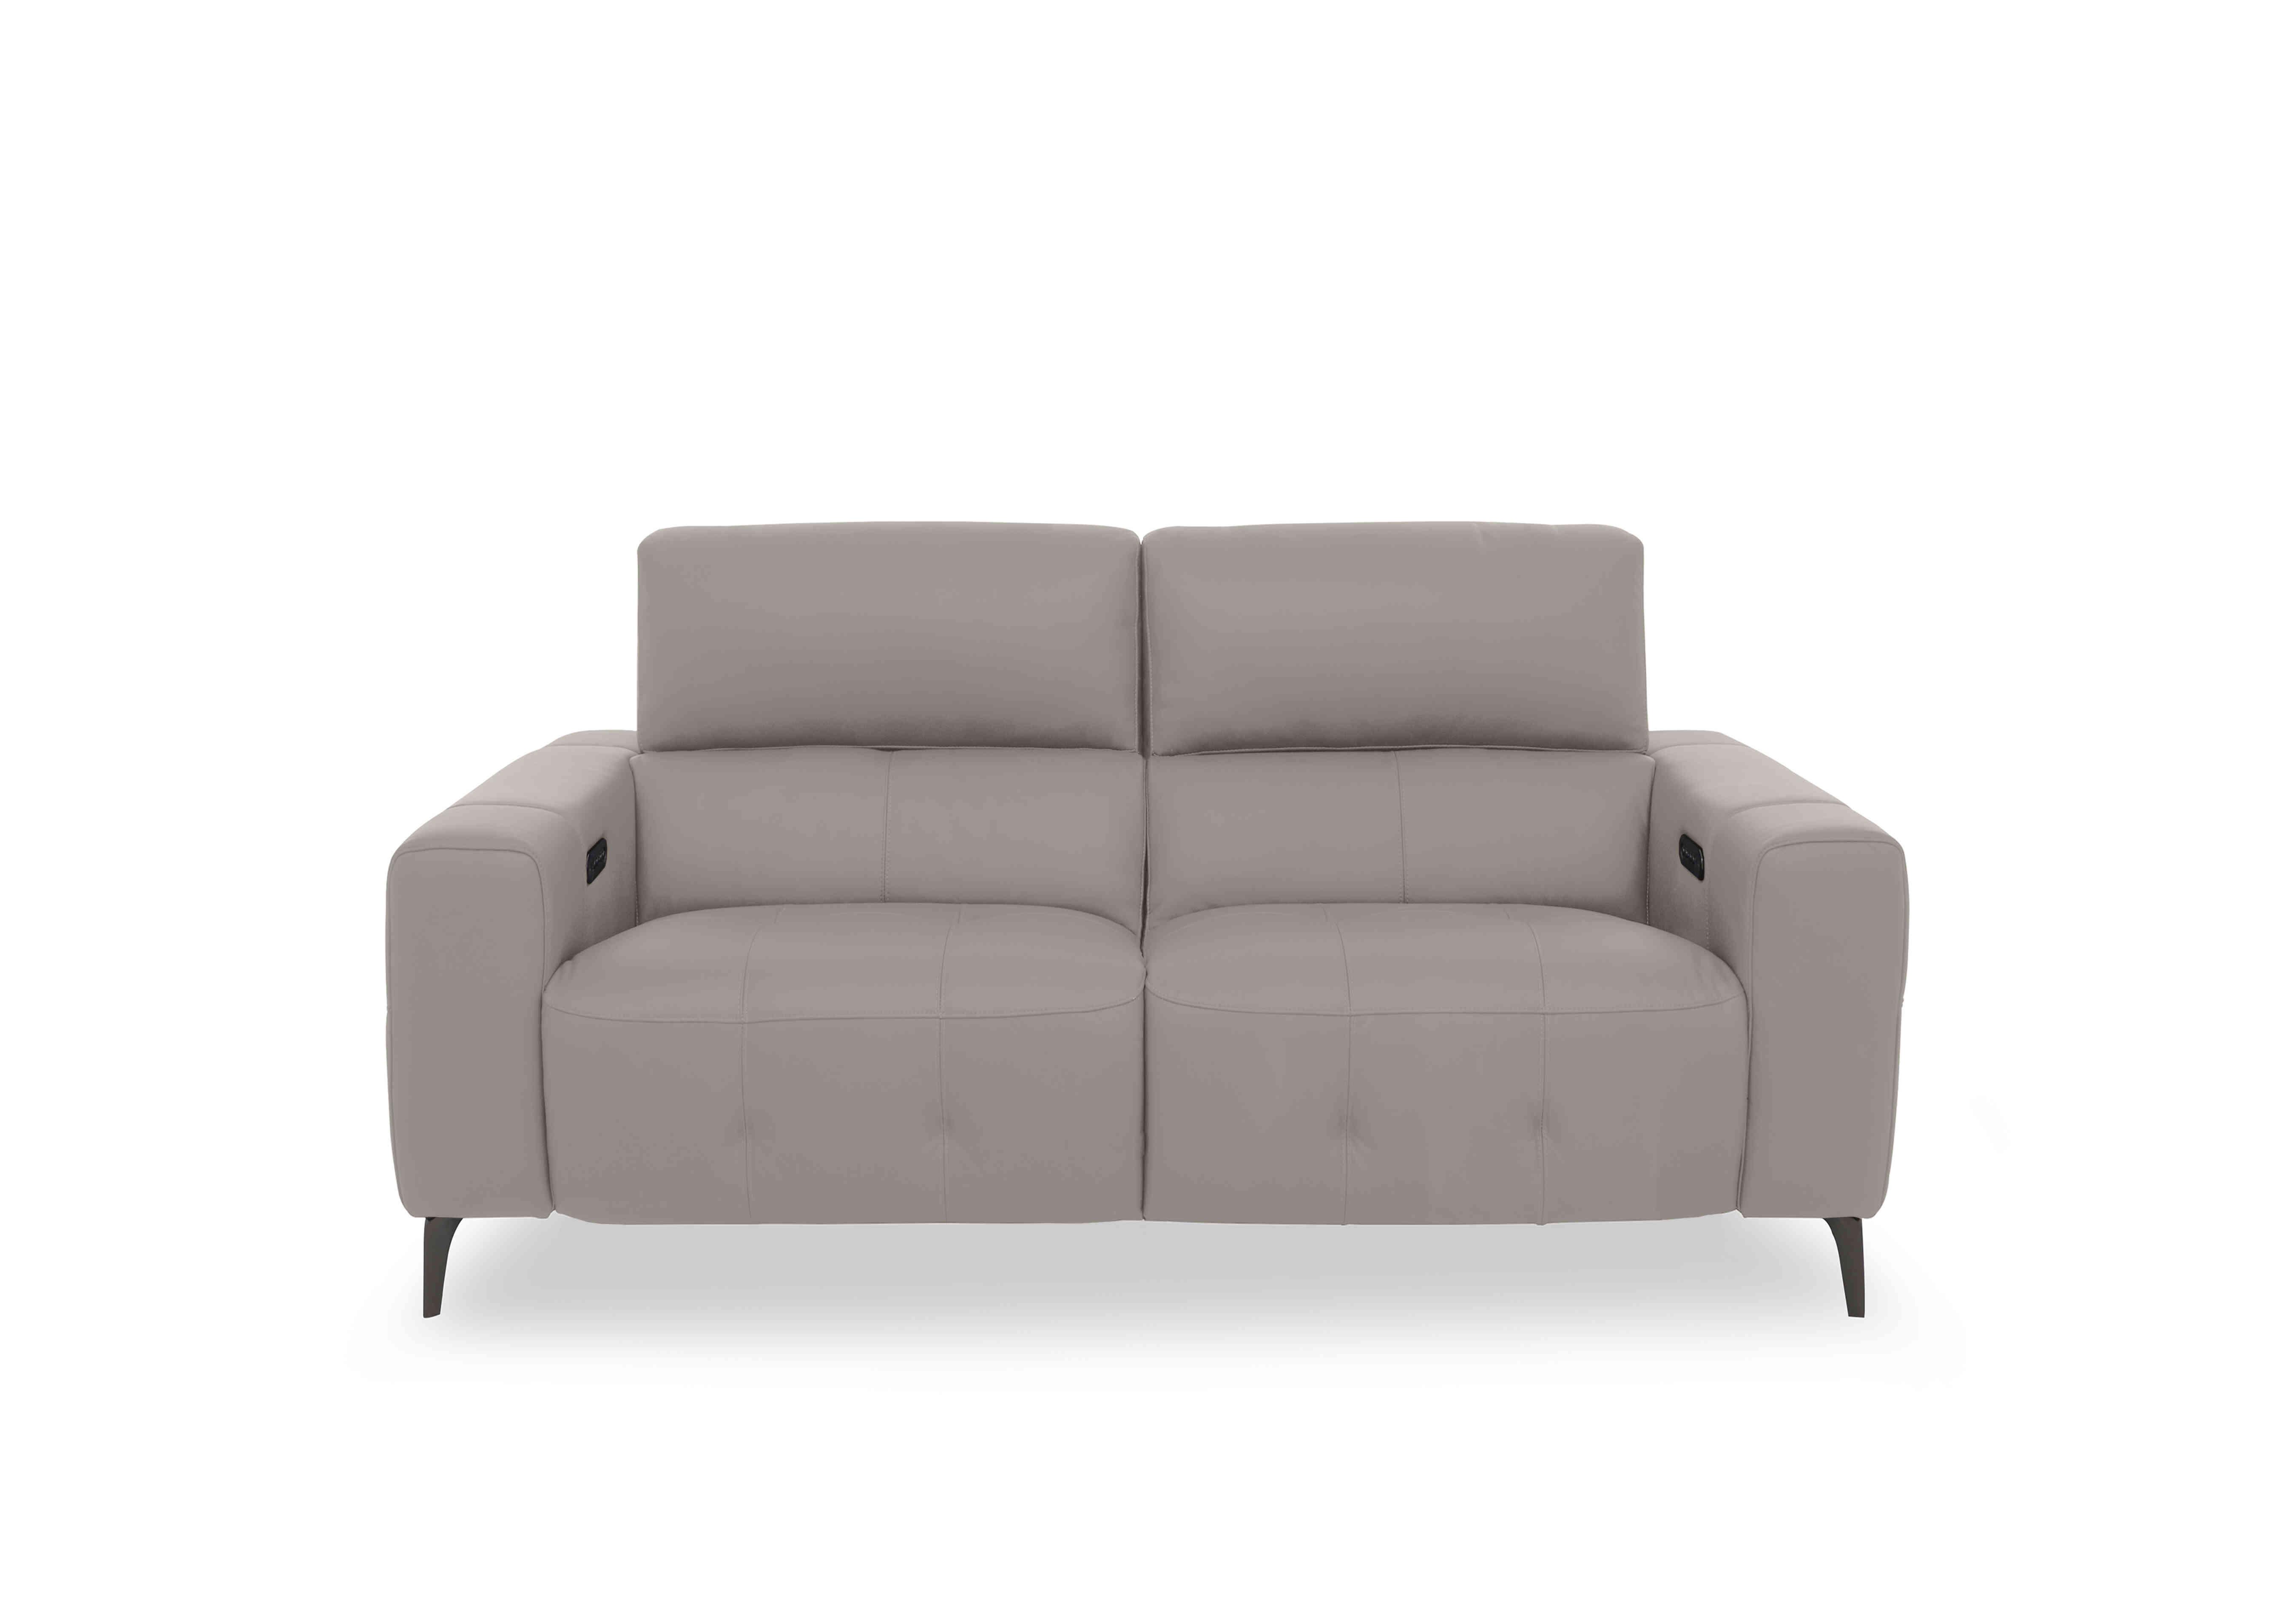 New York 2 Seater Leather Sofa in Bv-946b Silver Grey on Furniture Village